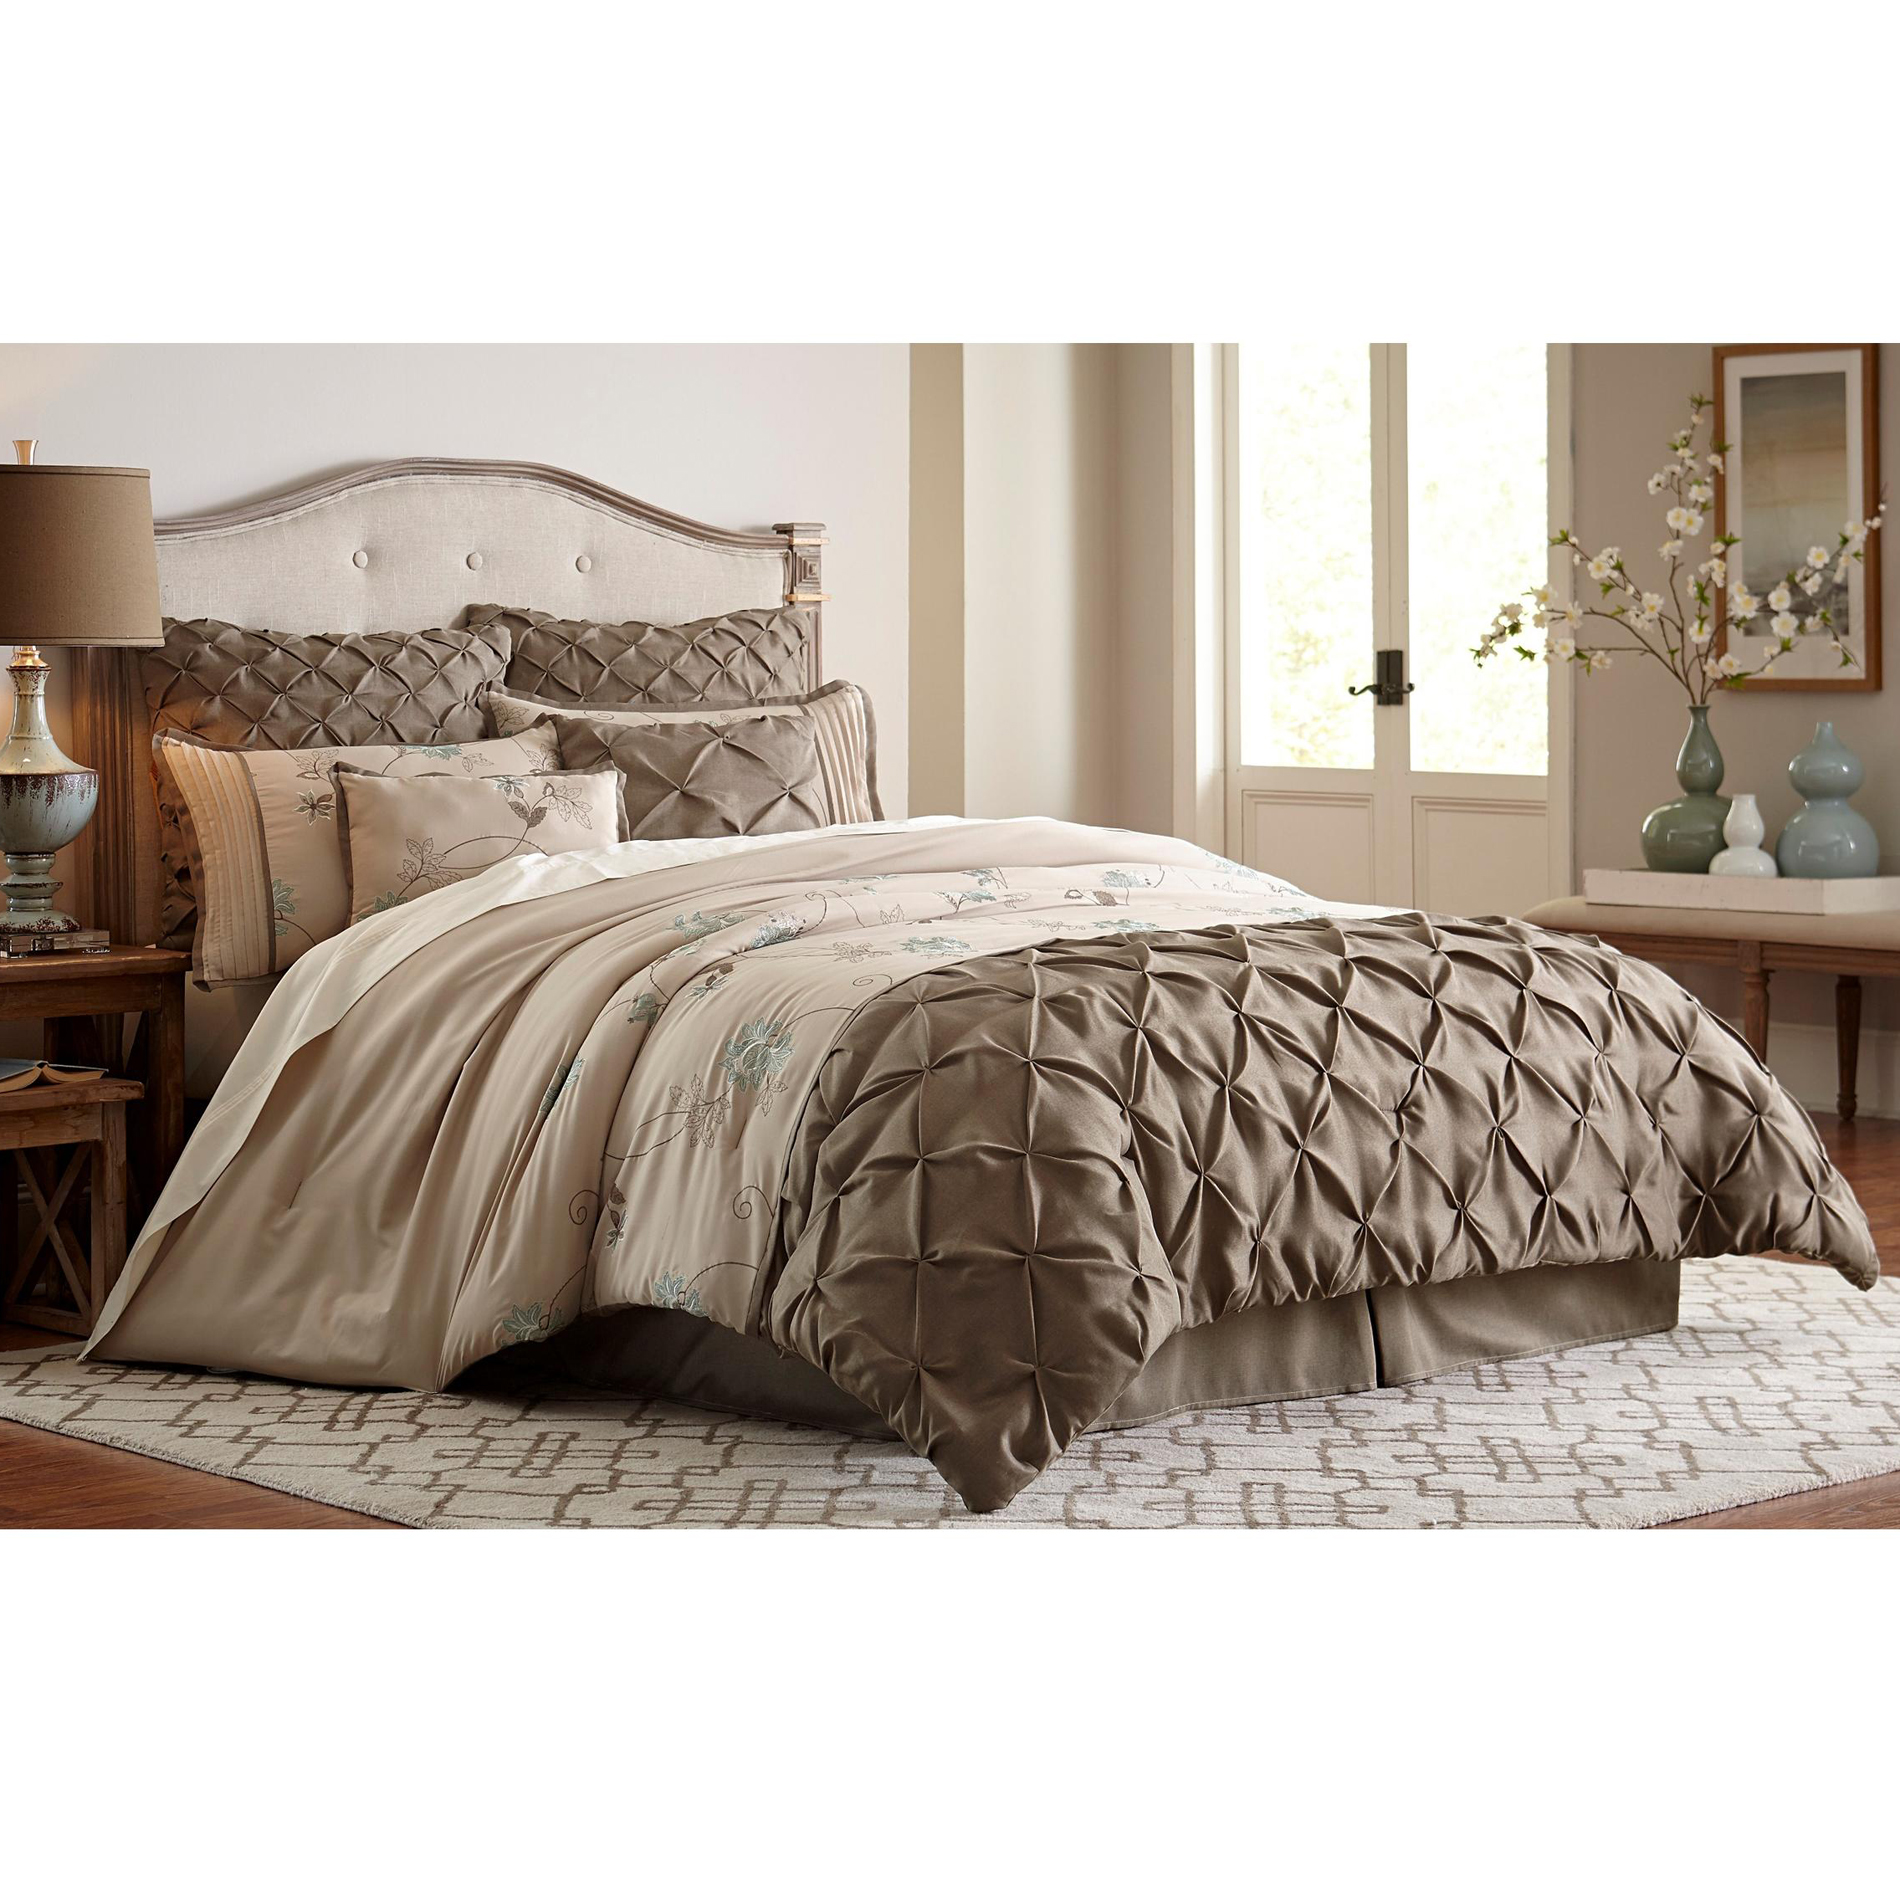 Essential Home 8 Piece Embroidered Comforter Set - Jacobean